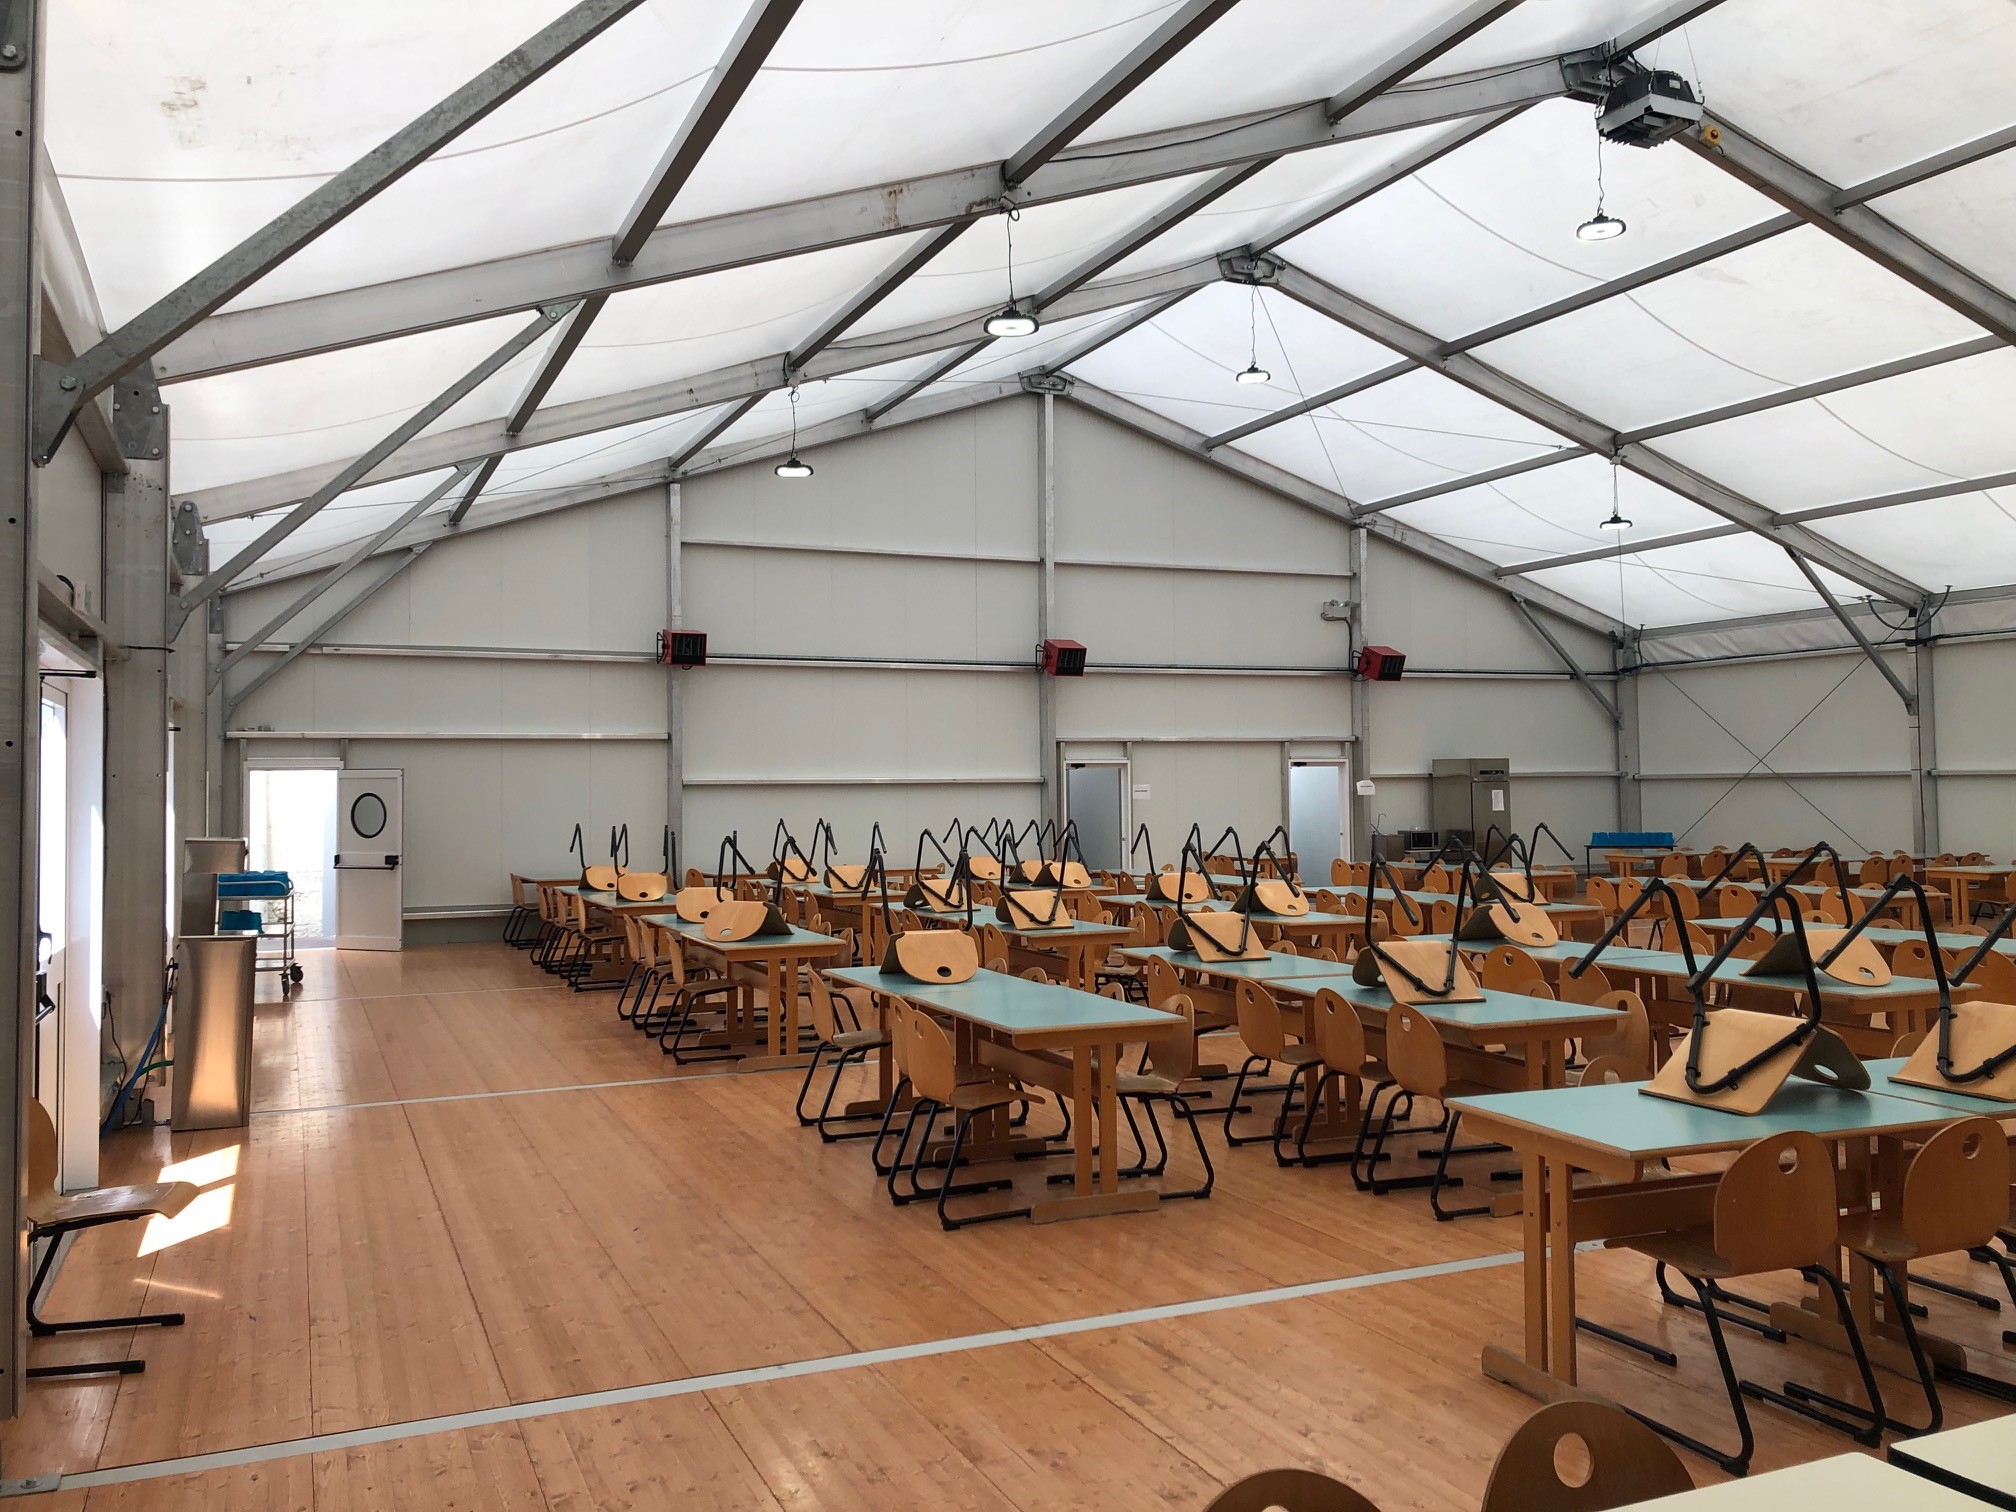 Lauralu temporary building structures and demountable buildings for education